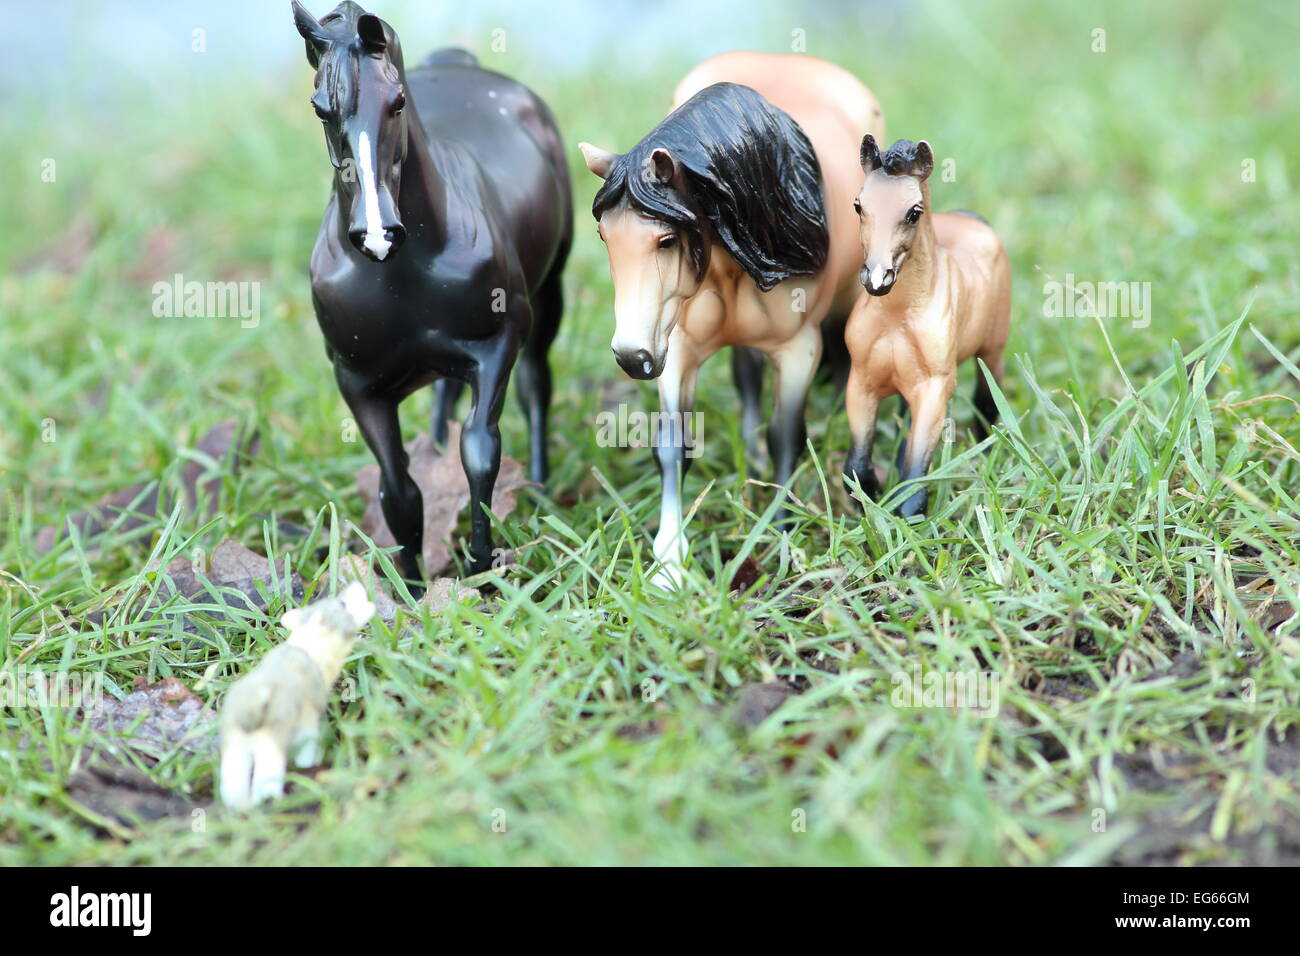 A second photograph composed and framed of the horse family with a wolf approaching. Still Life Photography Stock Photo